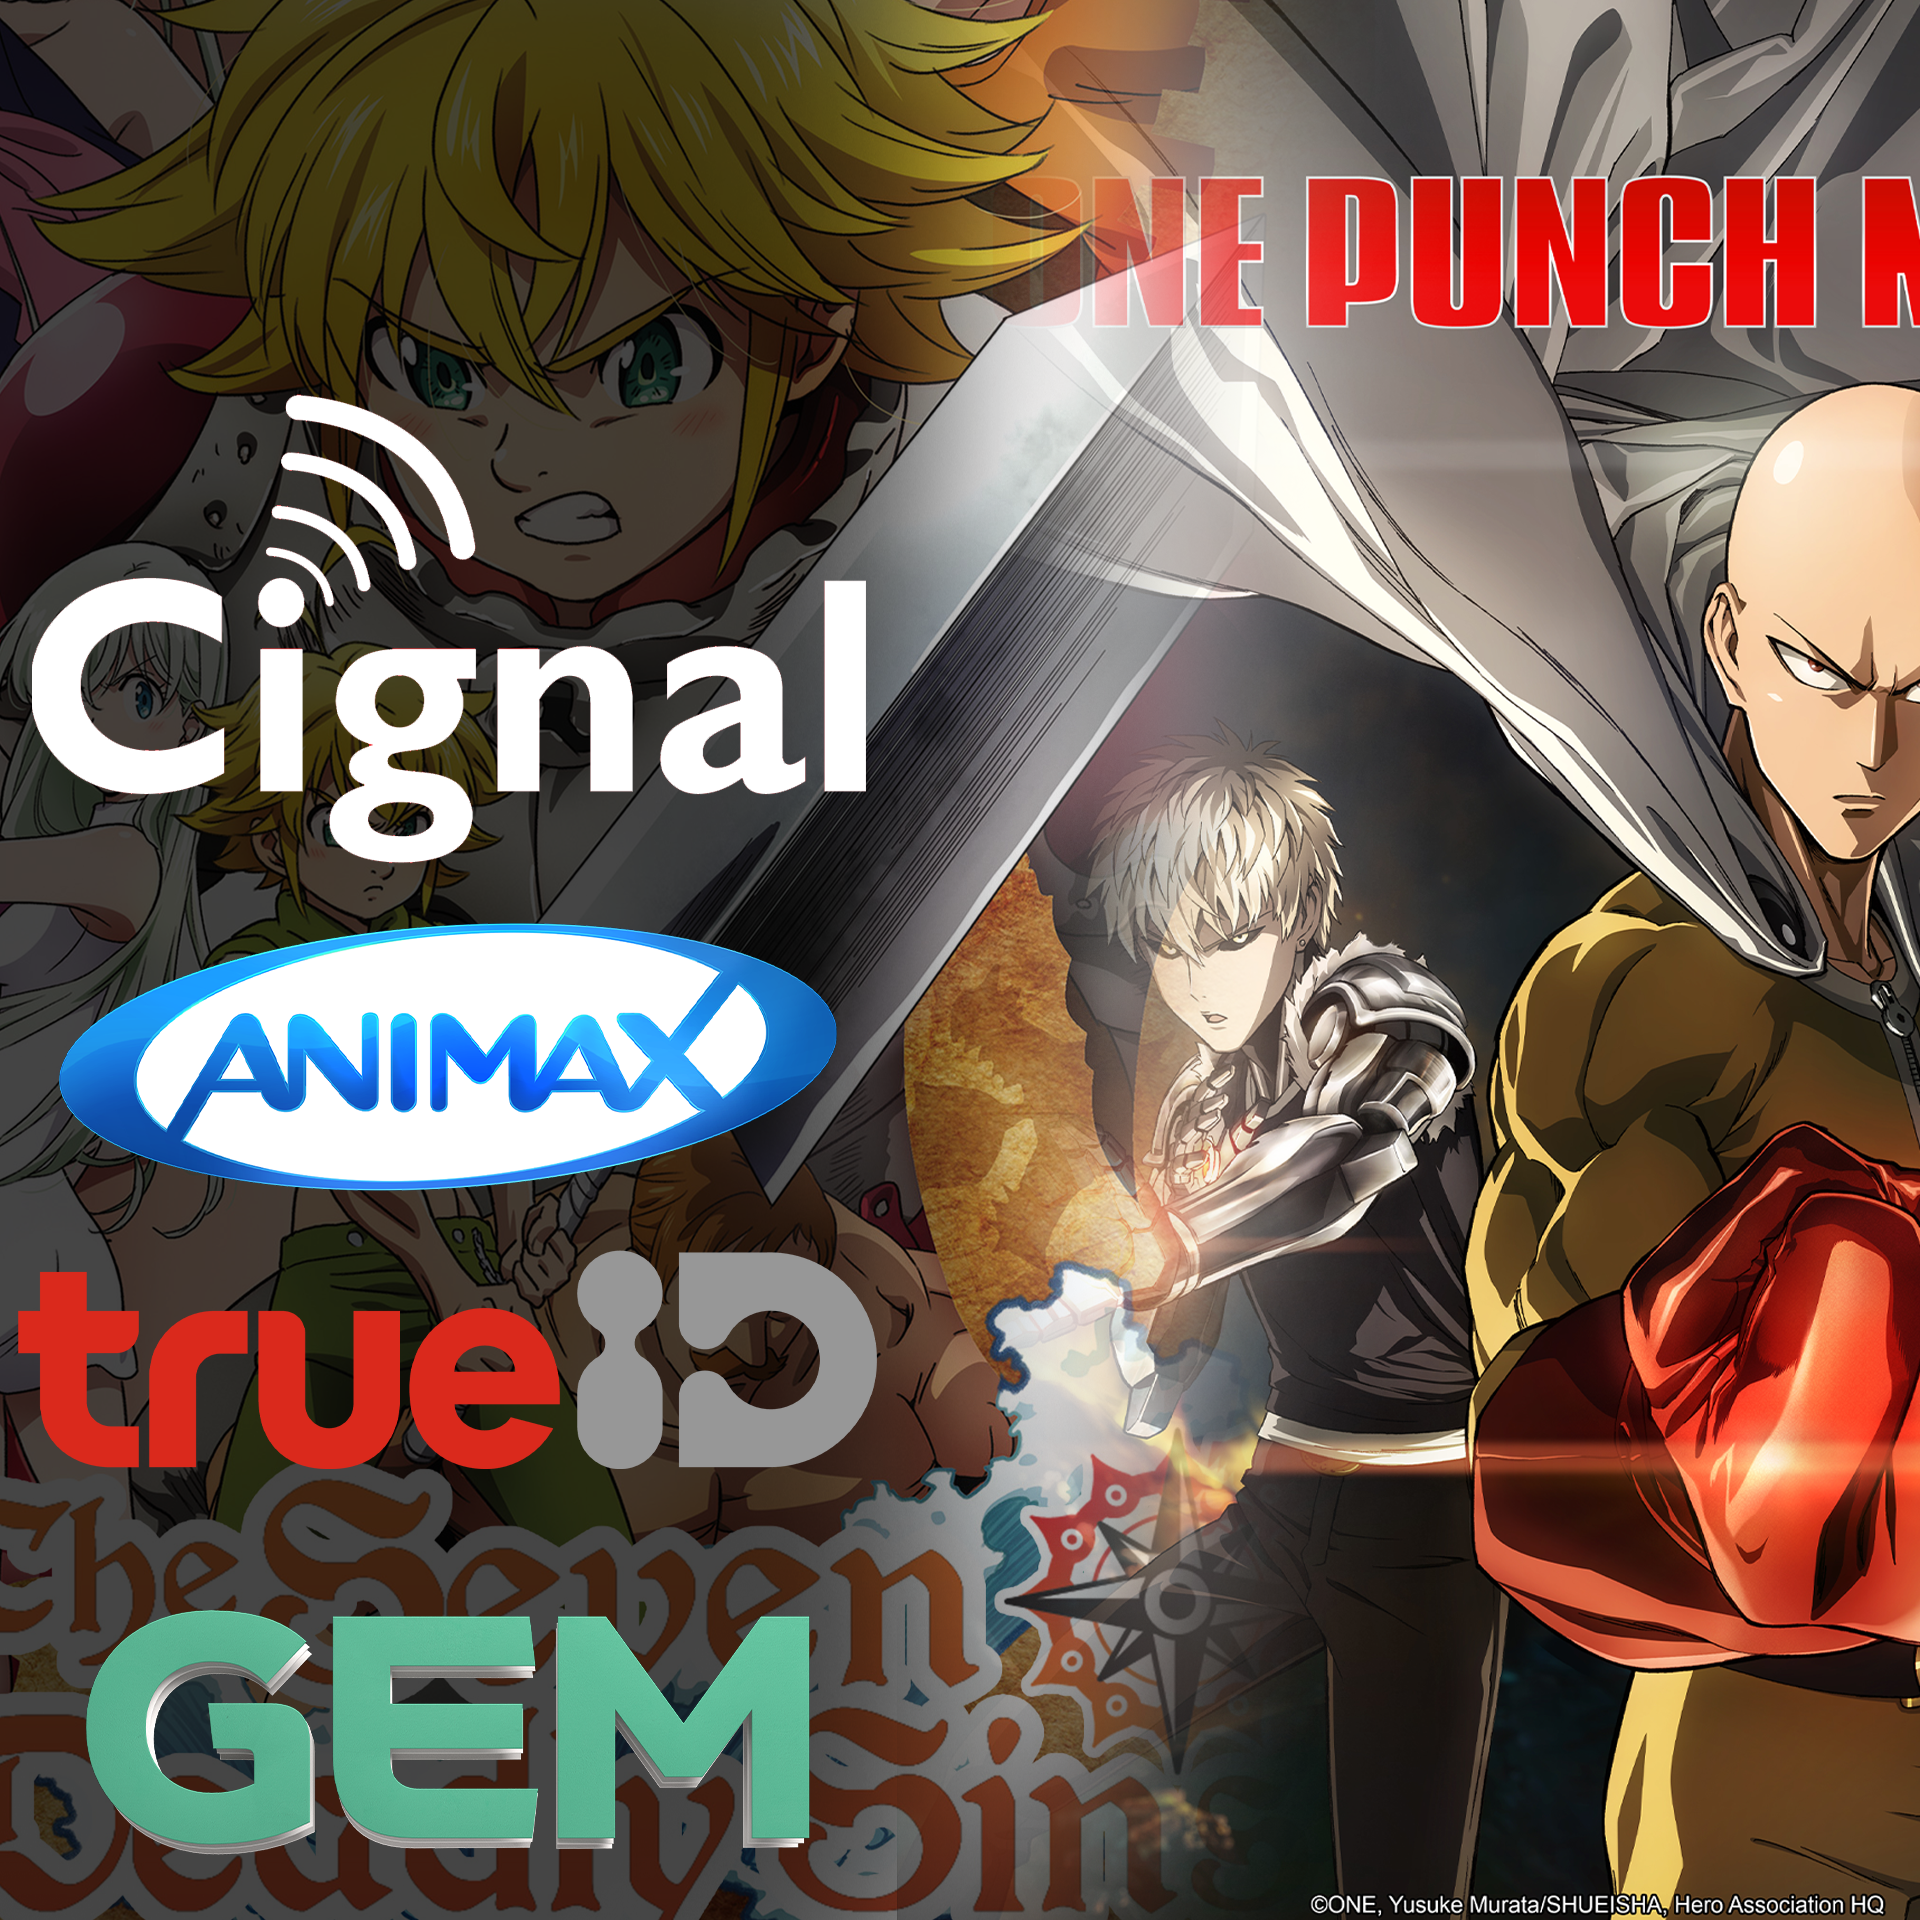 Animax And Gem Entertainment Content Leaders Expand In The Philippines In Partnership With Cignal And Trueid Philippines